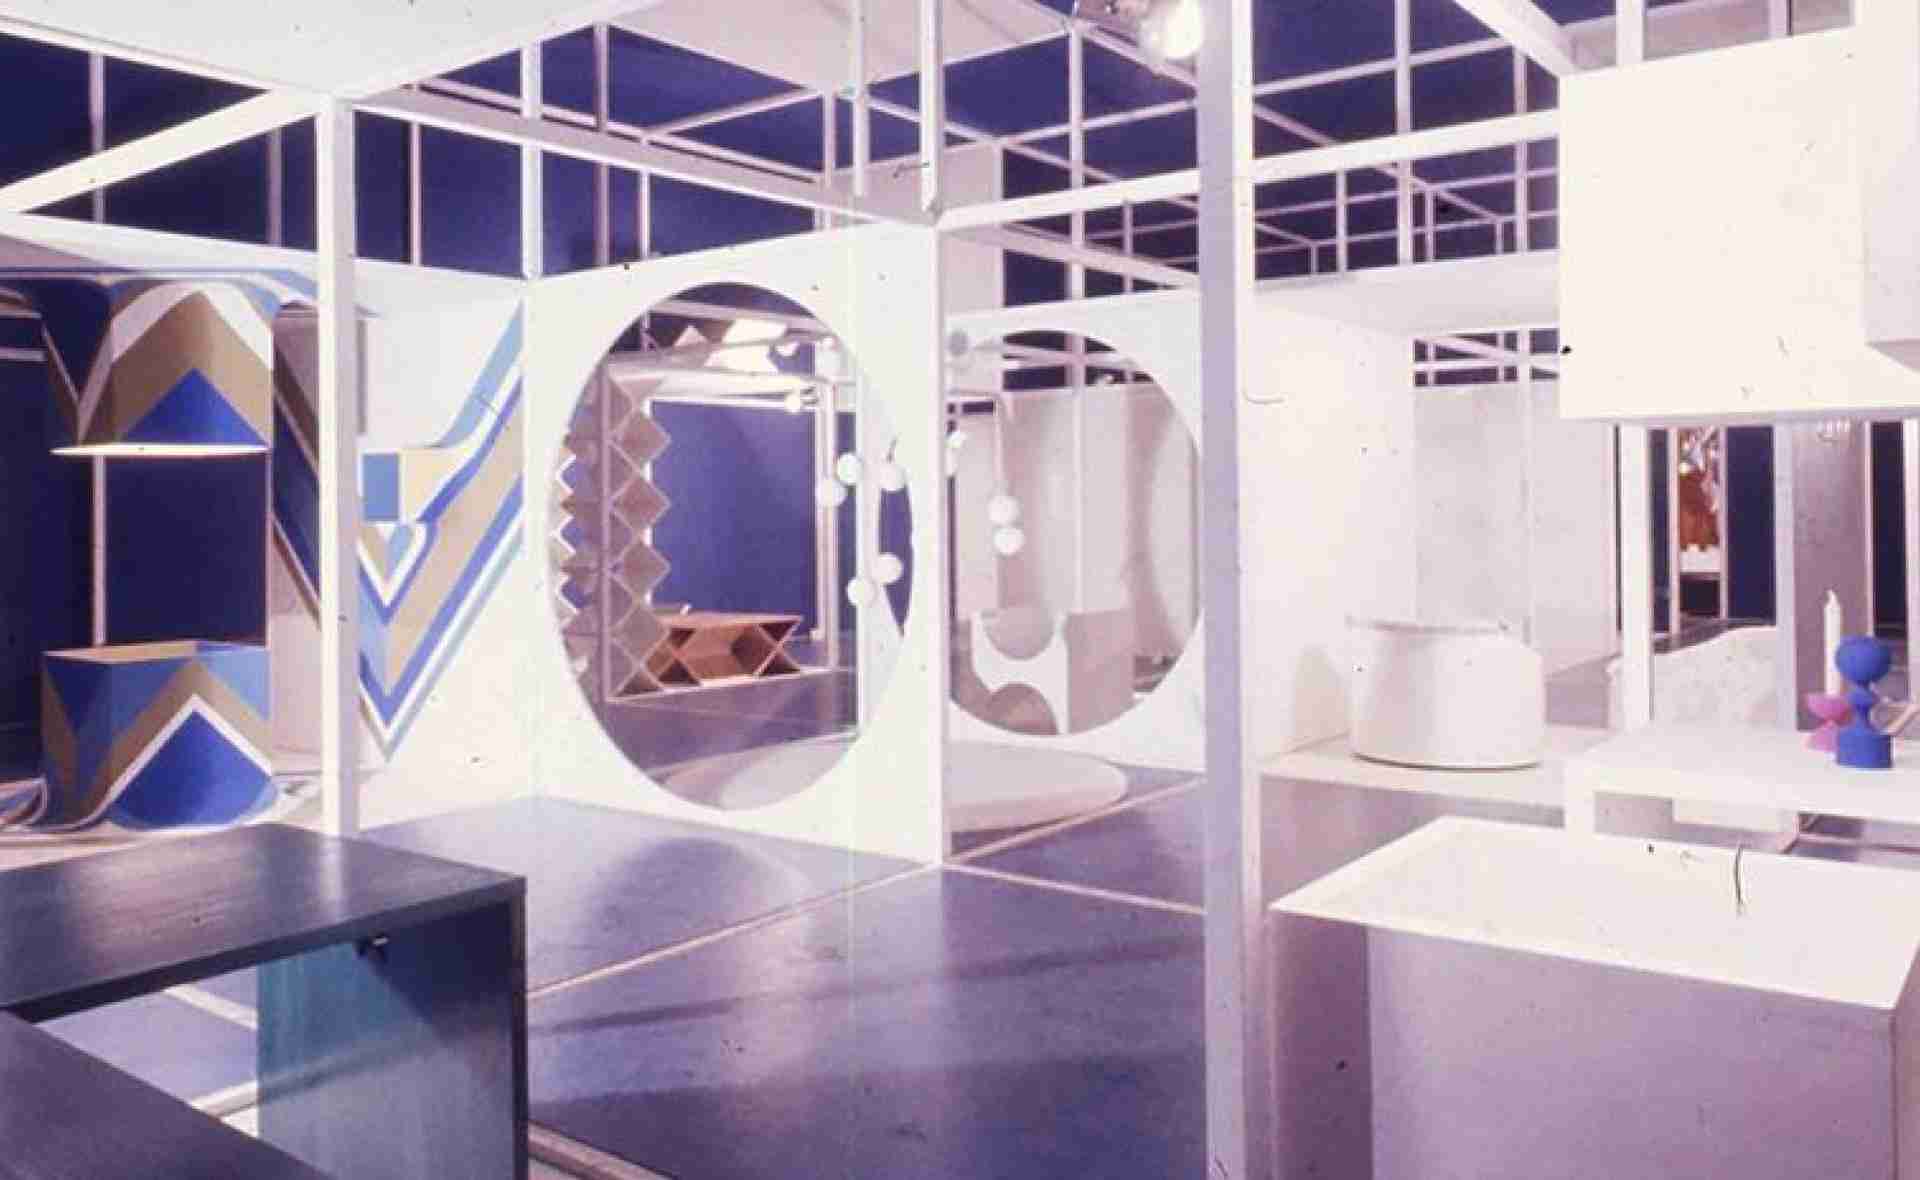 The special exhibition Space and Form I, Tallin Art Hall, 1969, Design concept by Bruno Tomberg, Maia Laul, Kärt Voogre, Eha Reitel, and Saima Veidenb